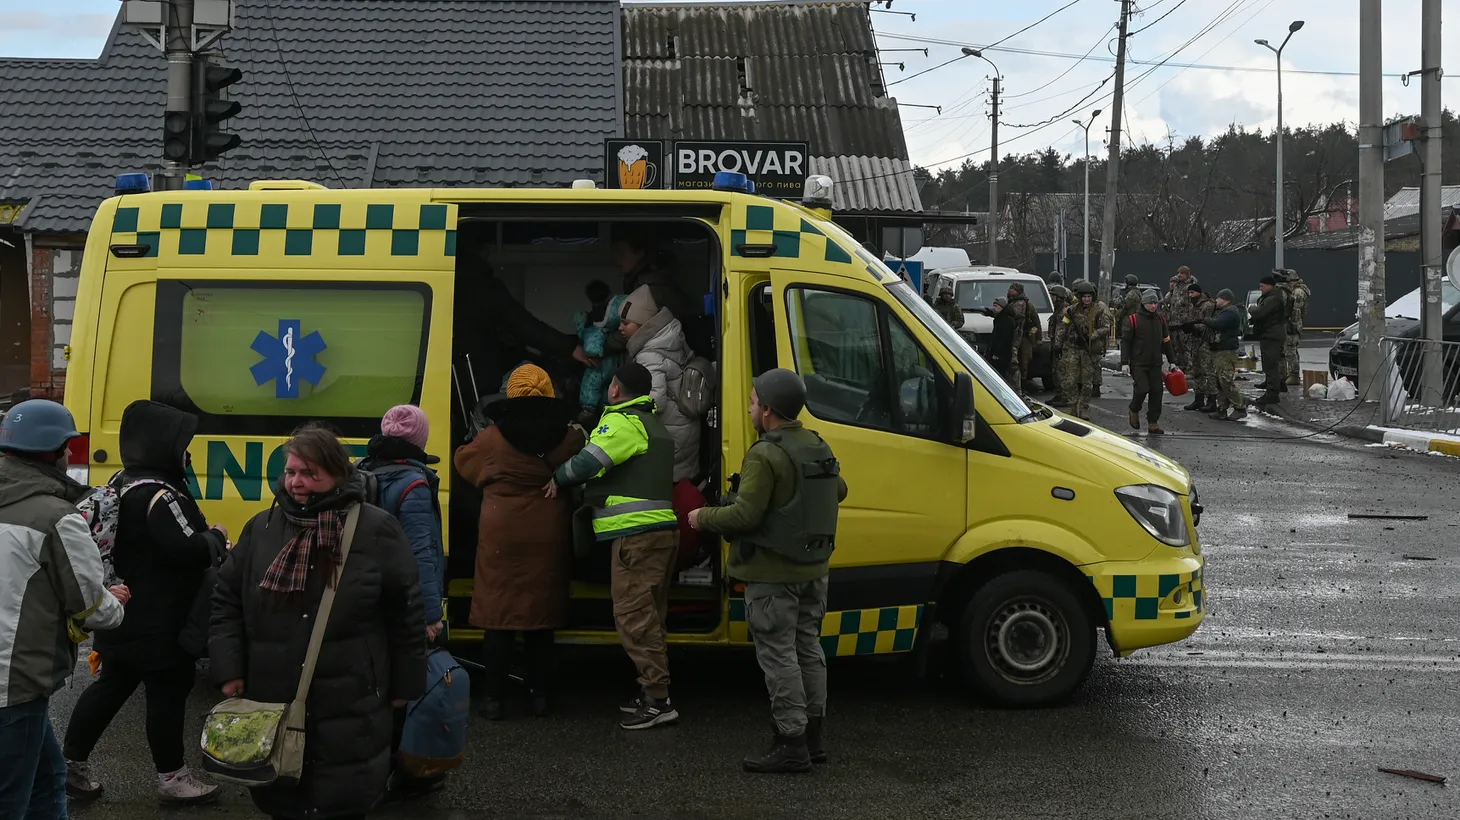 Evacuation efforts of Irpin continue through adverse weather conditions. Ukrainian first responders and volunteers ferried refugees to Kyiv in buses and vans. Civilians have been evacuating the region after Russia invaded Ukraine territory. Photo taken in Irpin, Ukraine, March 8, 2022.